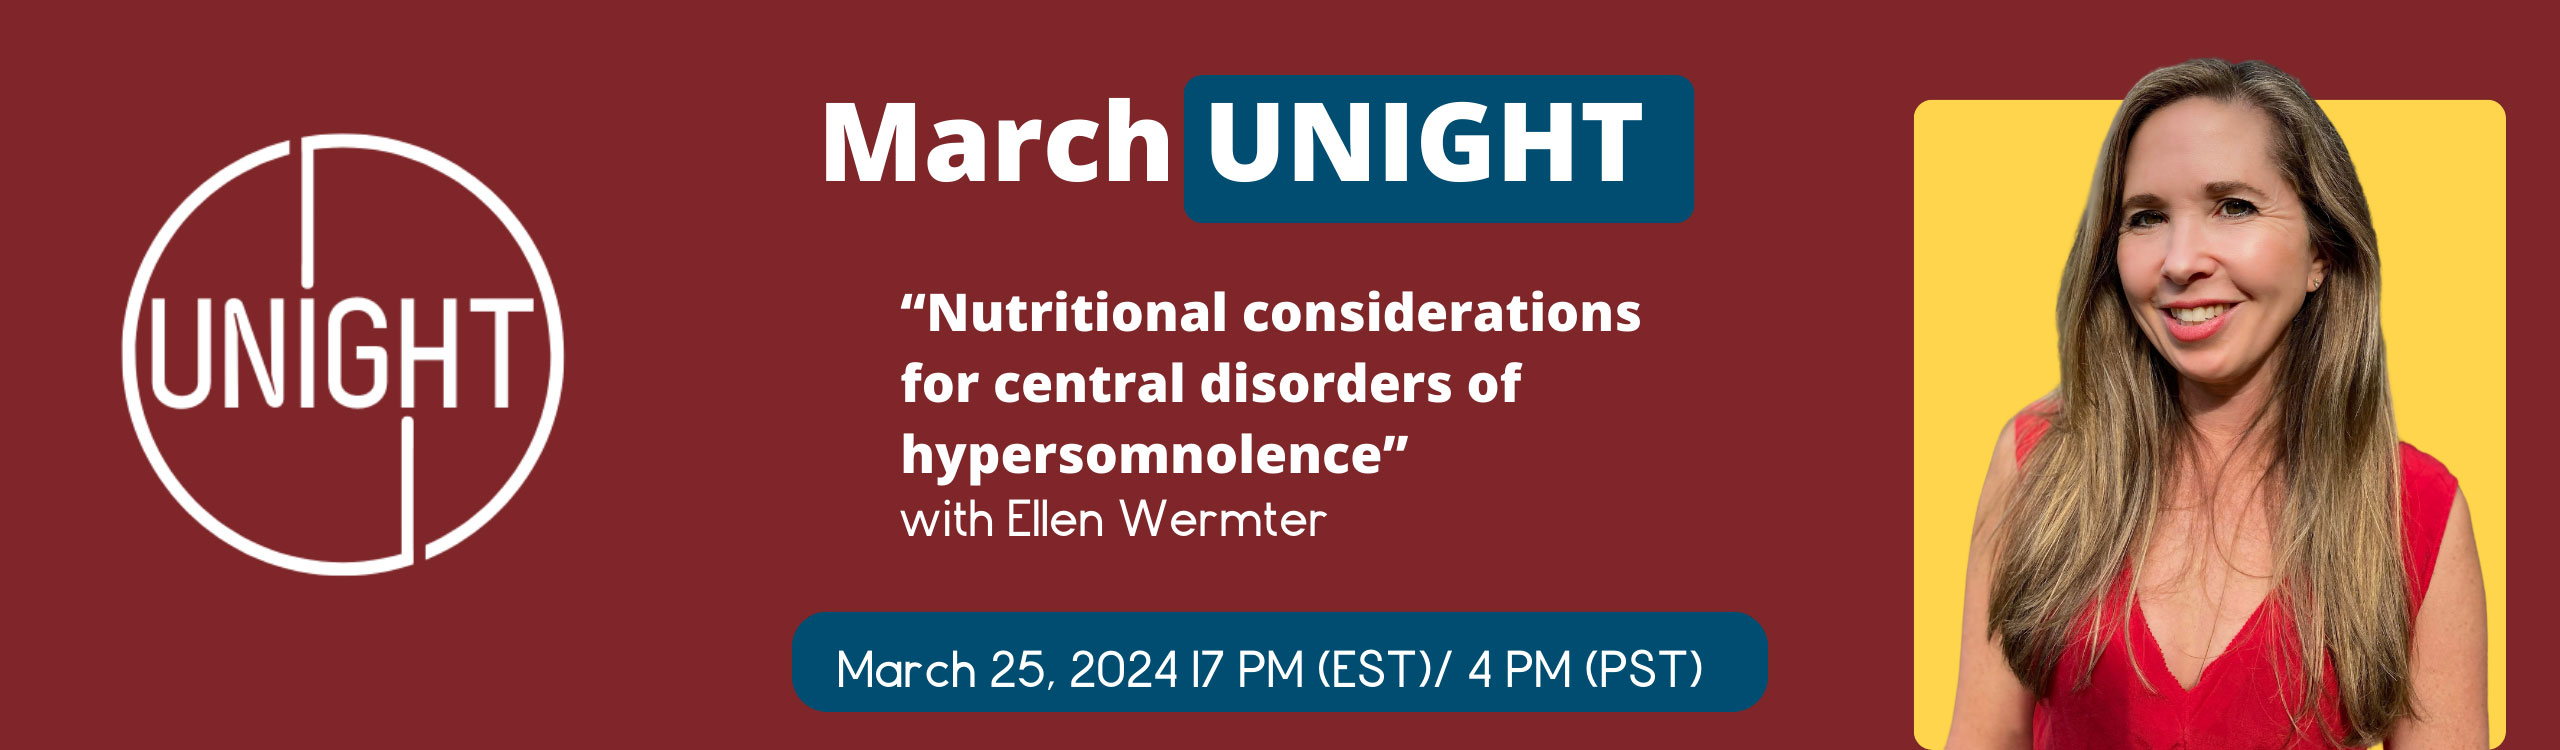 March UNIGHT | "Nutritional considerations for central disorders or hypersomnolence" with Ellen Wermter | March 25, 2024 | 7 PM (EST) / 4 PM (PST)